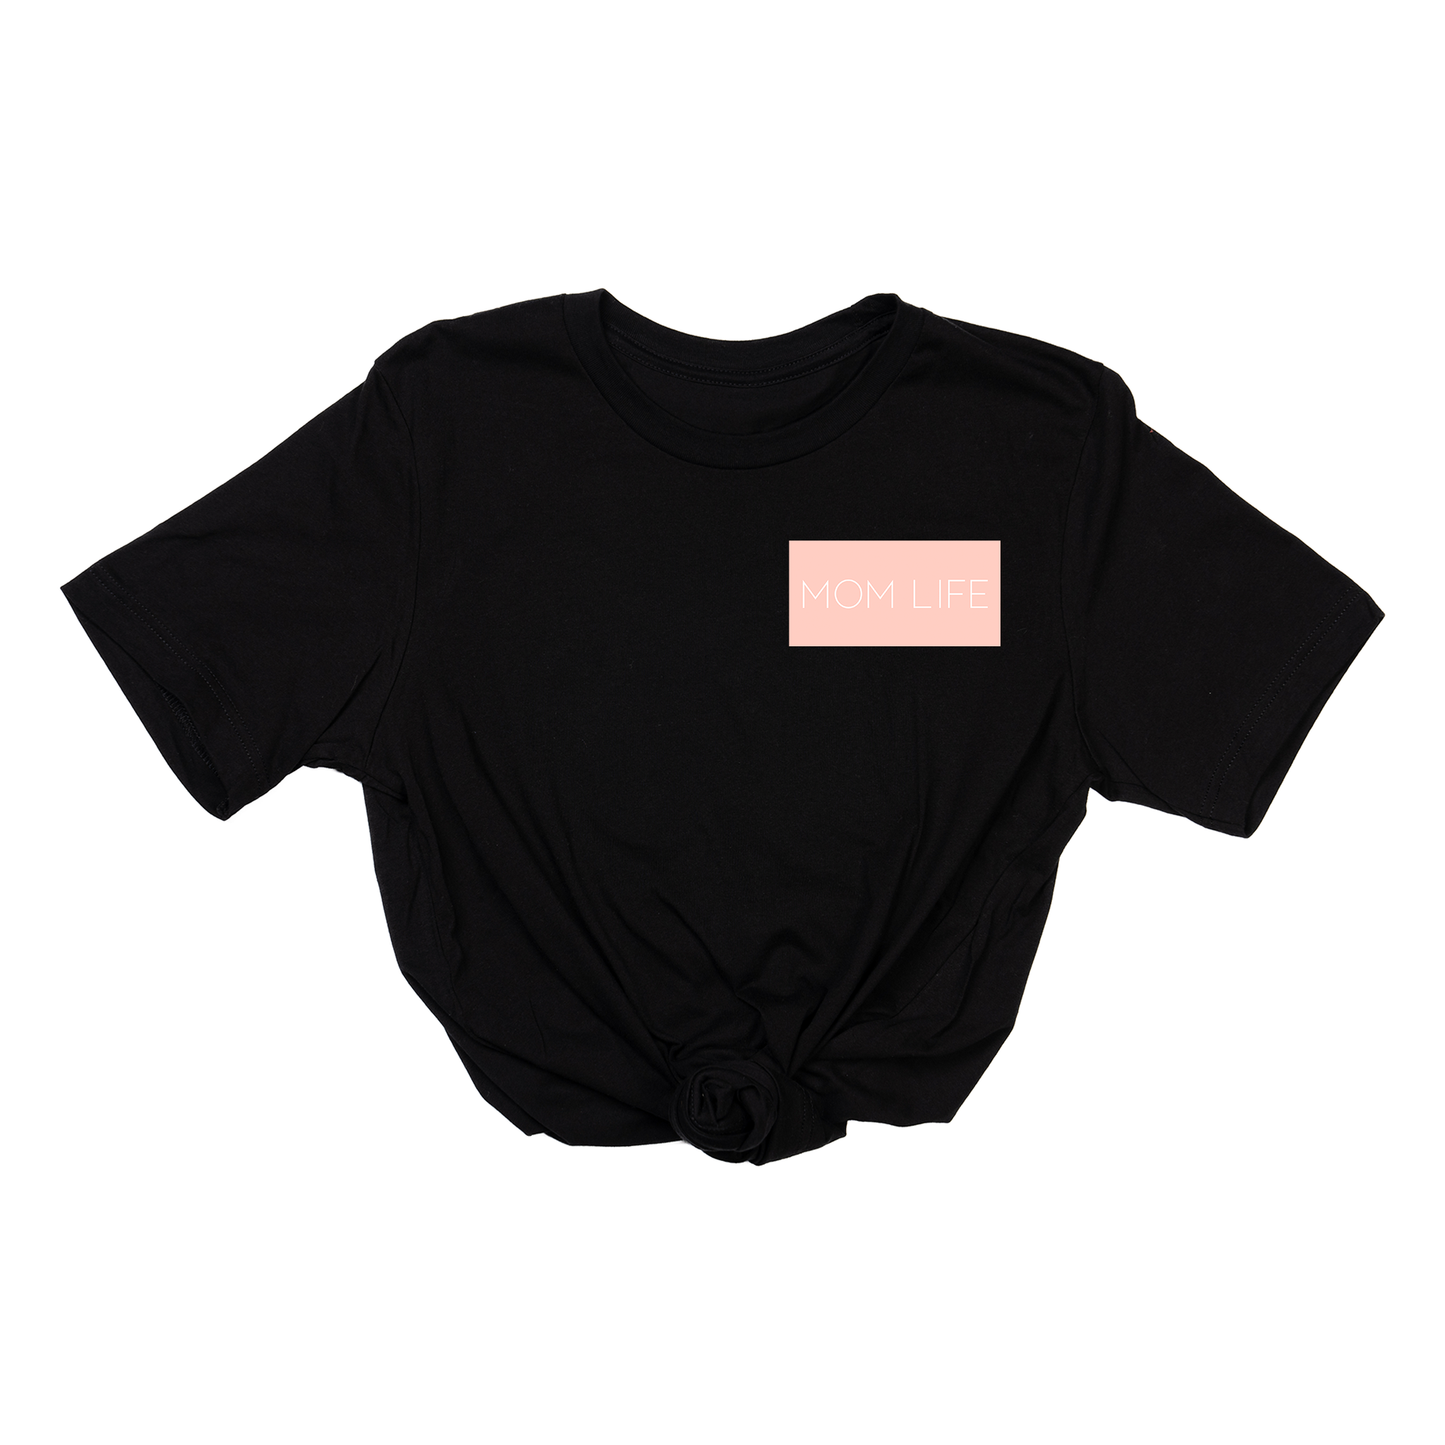 Mom Life (Boxed Collection, Pocket, Ballerina Pink Box/White Text) - Tee (Black)